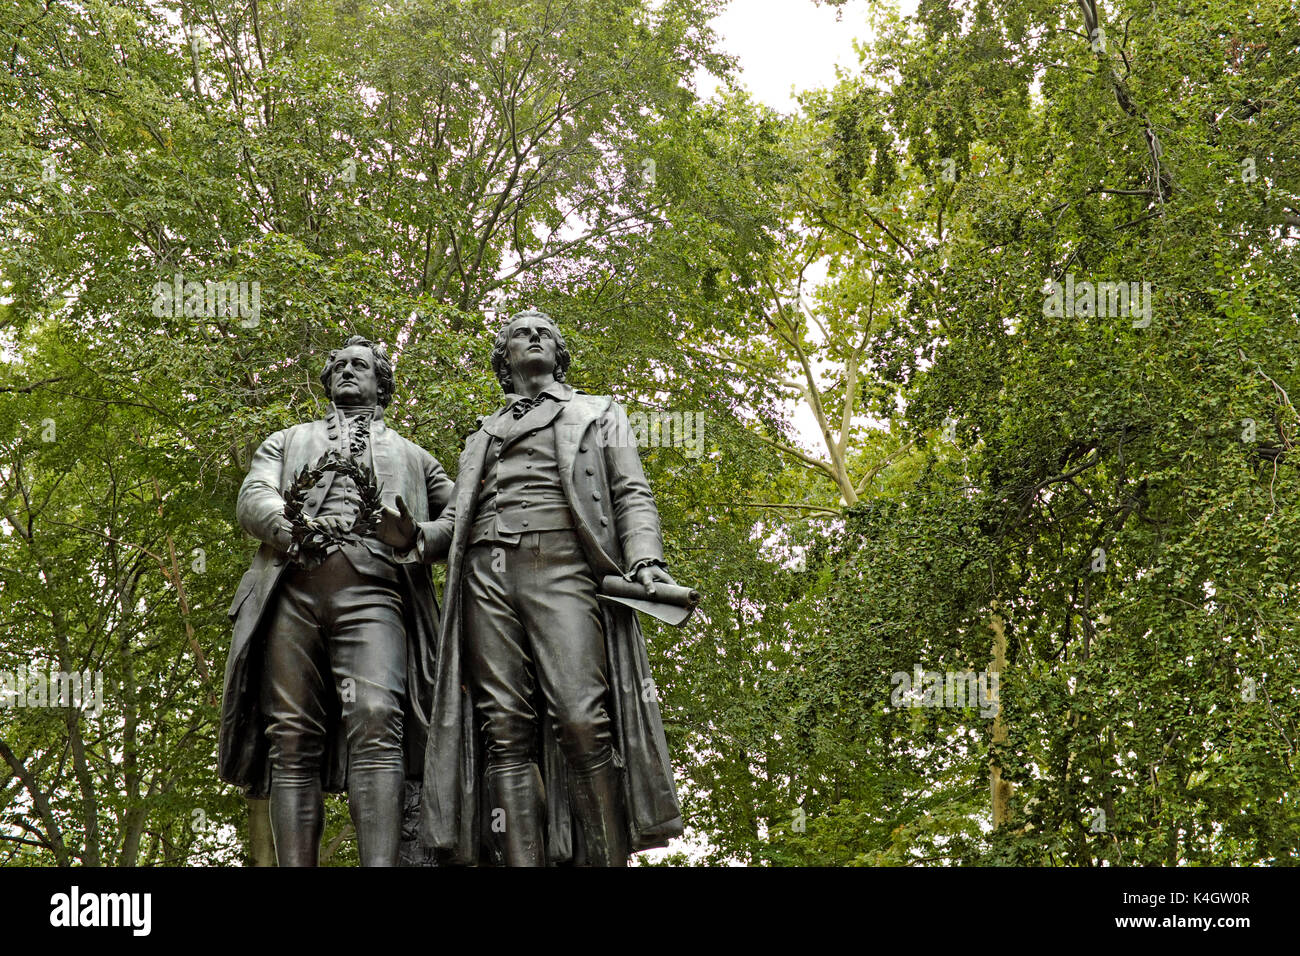 Goethe-Schiller monument in the German Cultural Gardens of Wade Park in Cleveland, Ohio, USA is an exact replica of the original in Weimar, Germany. Stock Photo